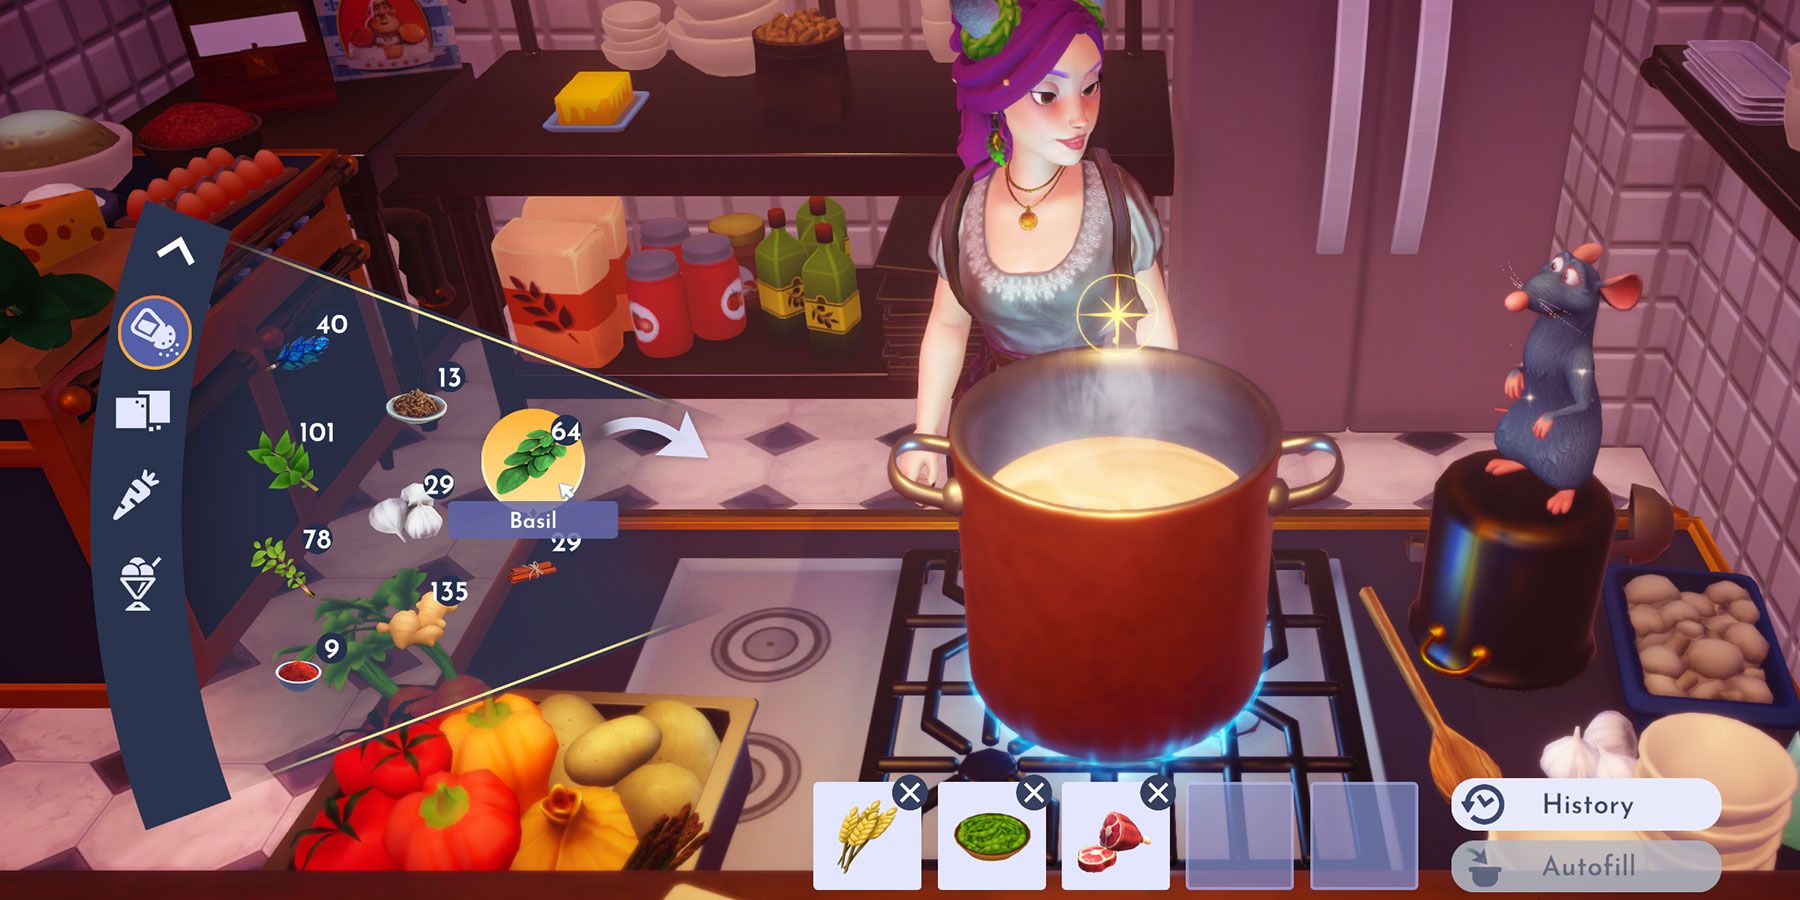 Cooking with spices in Disney Dreamlight Valley.